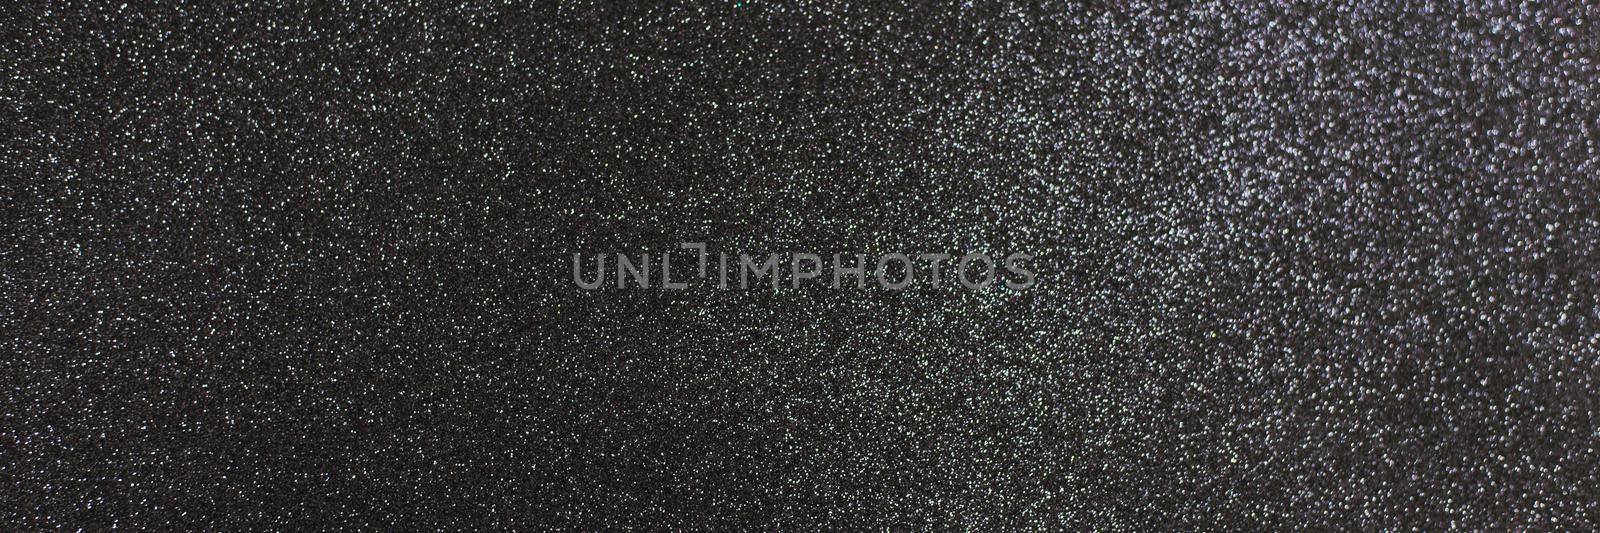 Black shiny background with sparkles. Dark gray abstract festive background. Web banner.